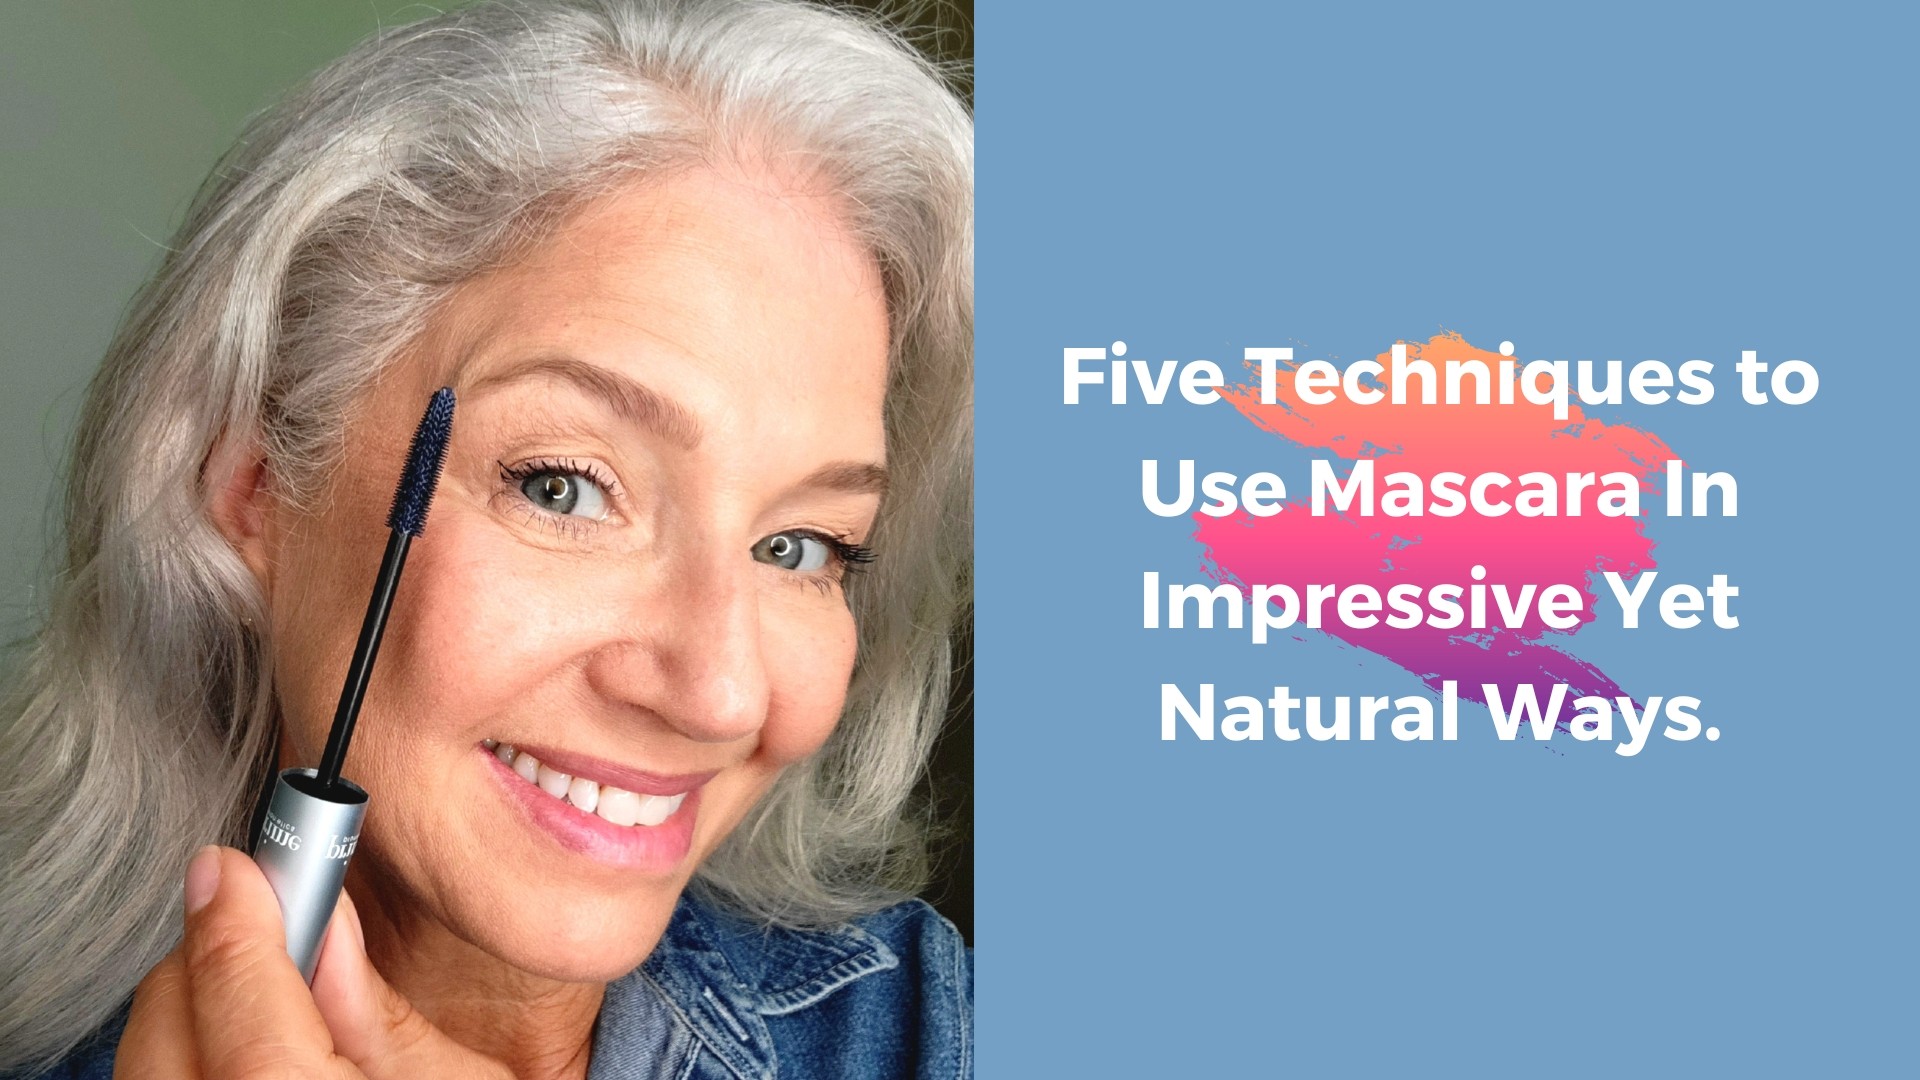 Five Techniques to Use Mascara